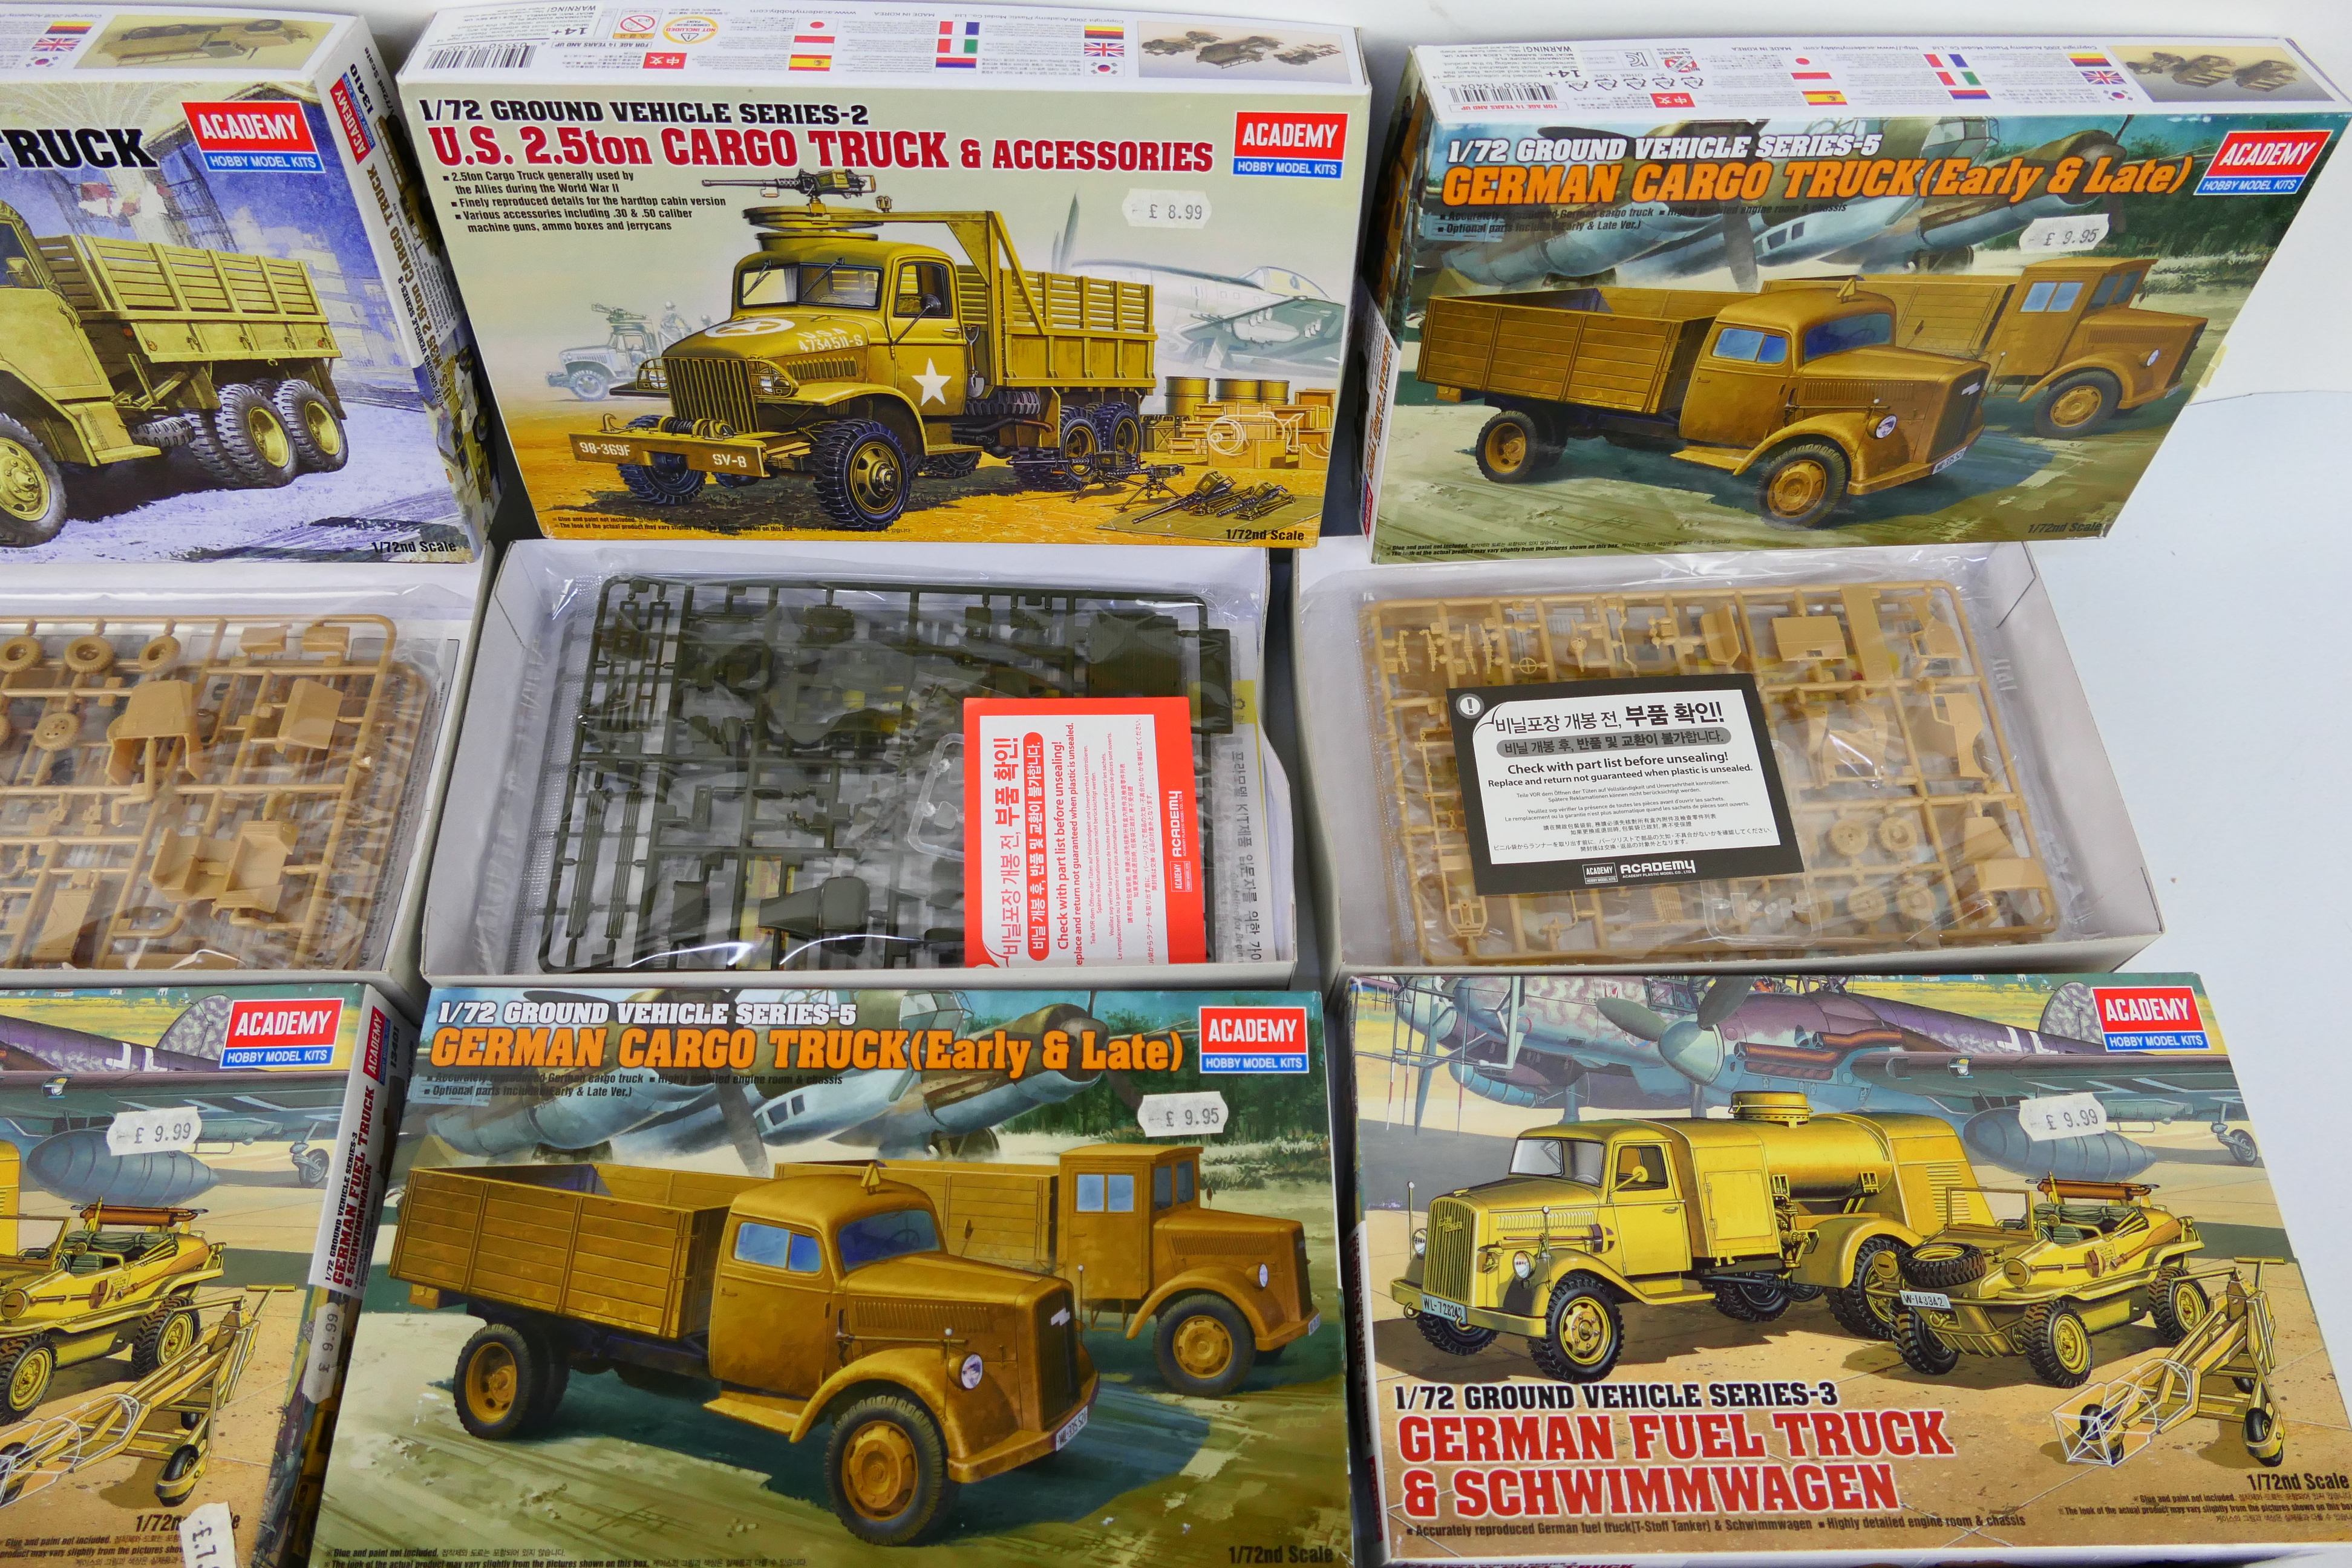 Academy - Six boxed plastic military vehicle model kits from Academy in 1:72 scale. - Image 3 of 4